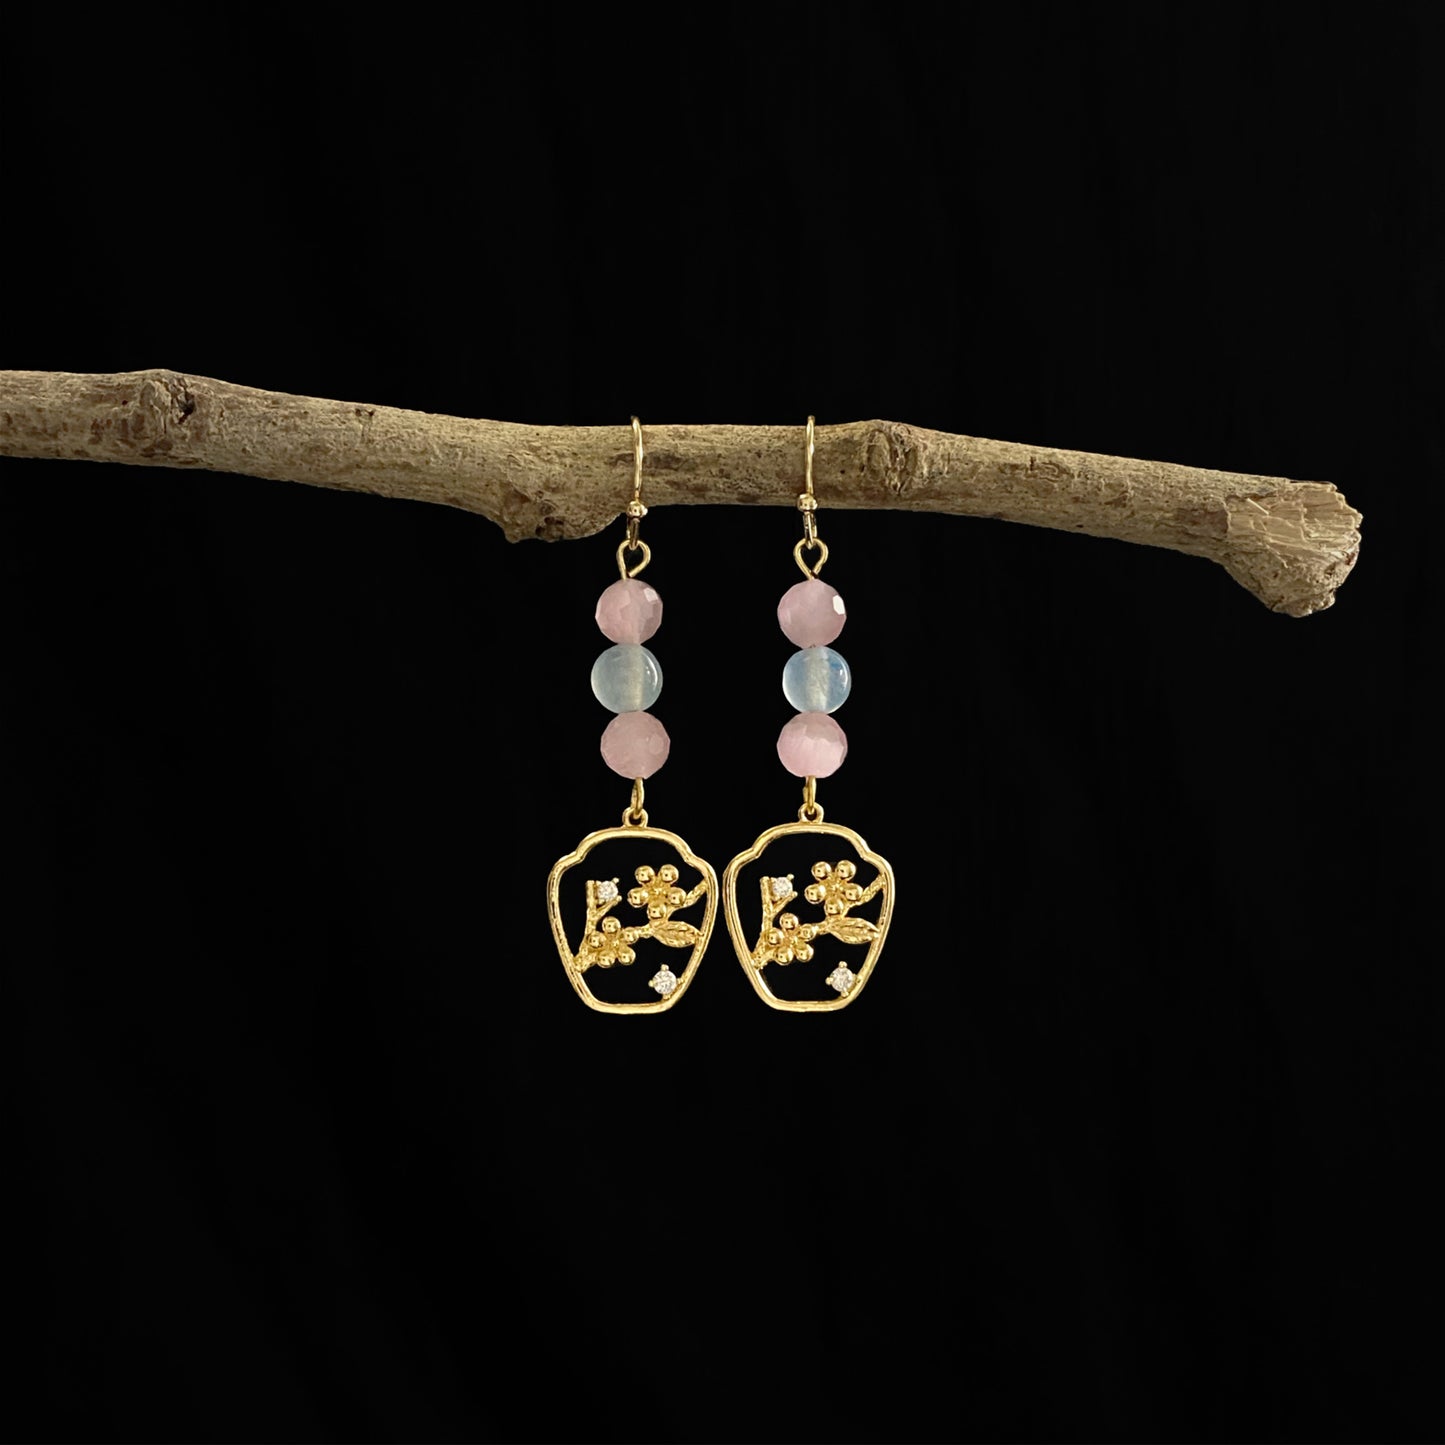 Oriental Cherry Blossom Earrings with Crystals - 14K Real Gold Plated Jewelry